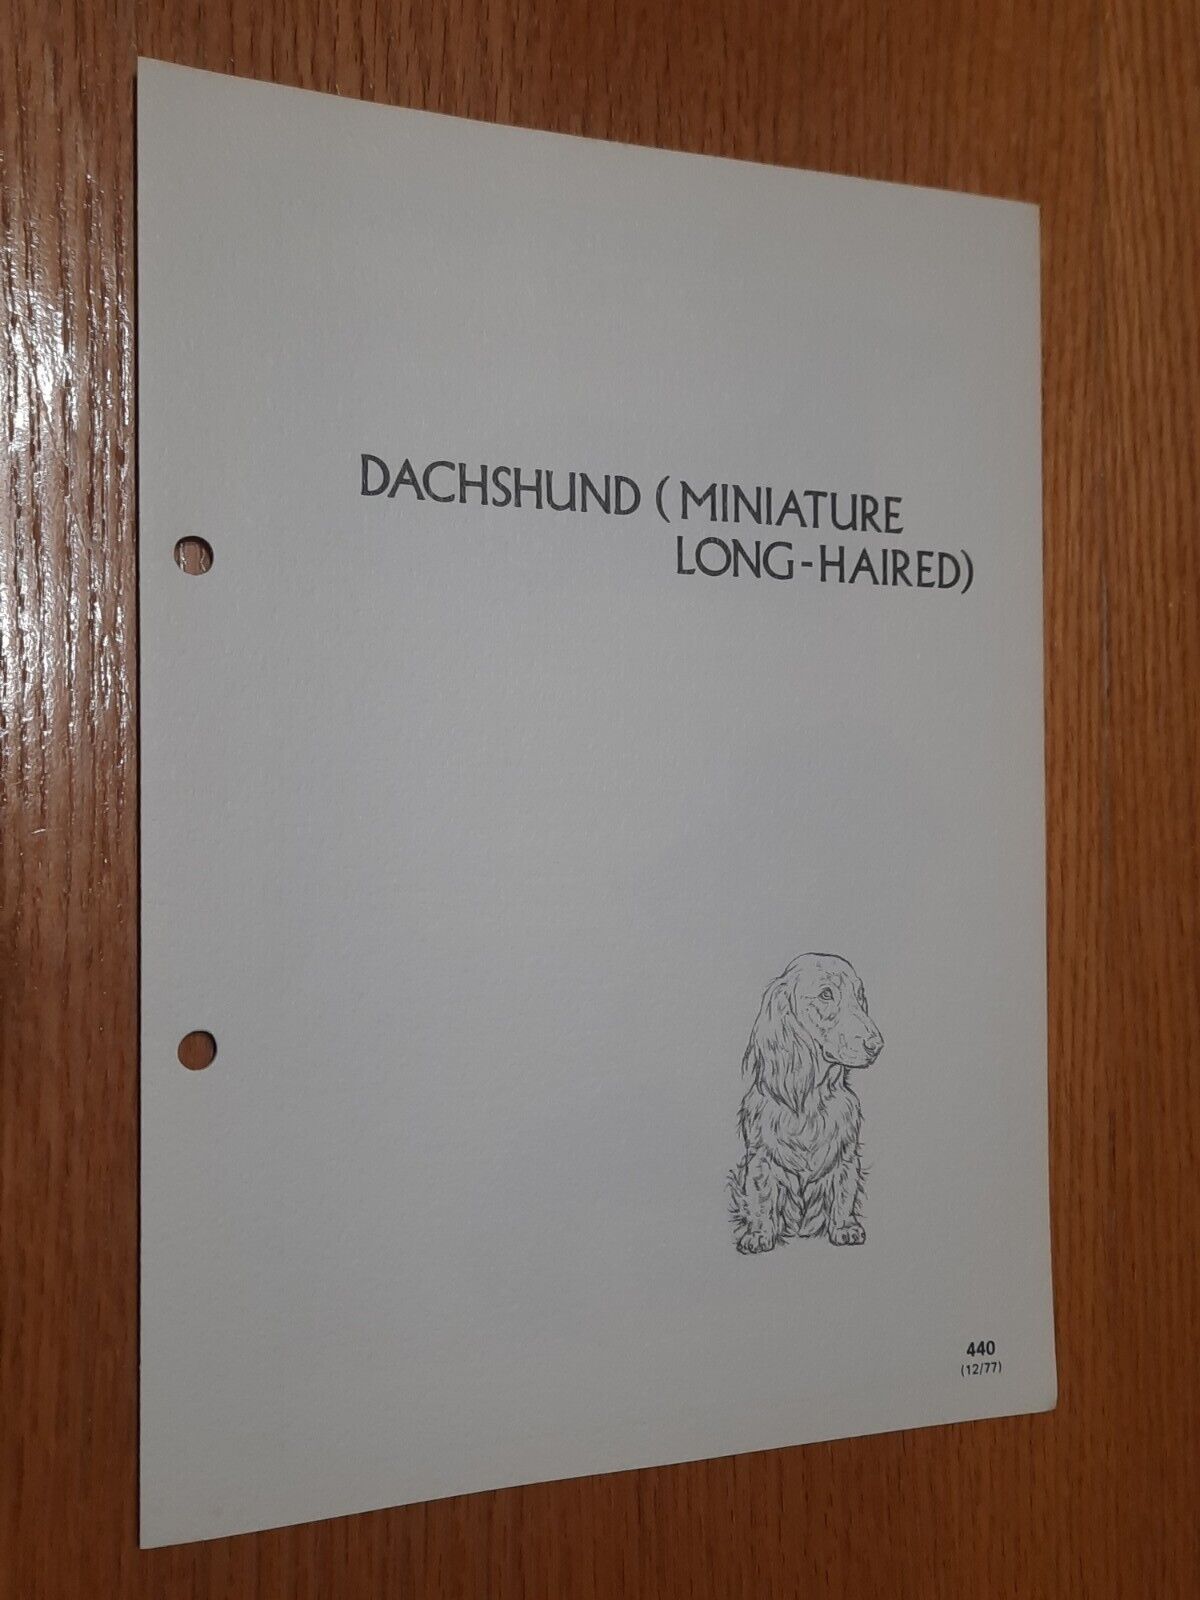 Dachshund Mini Long-Haired Breed Supplement RAS Kennel Control Hounds Group 4